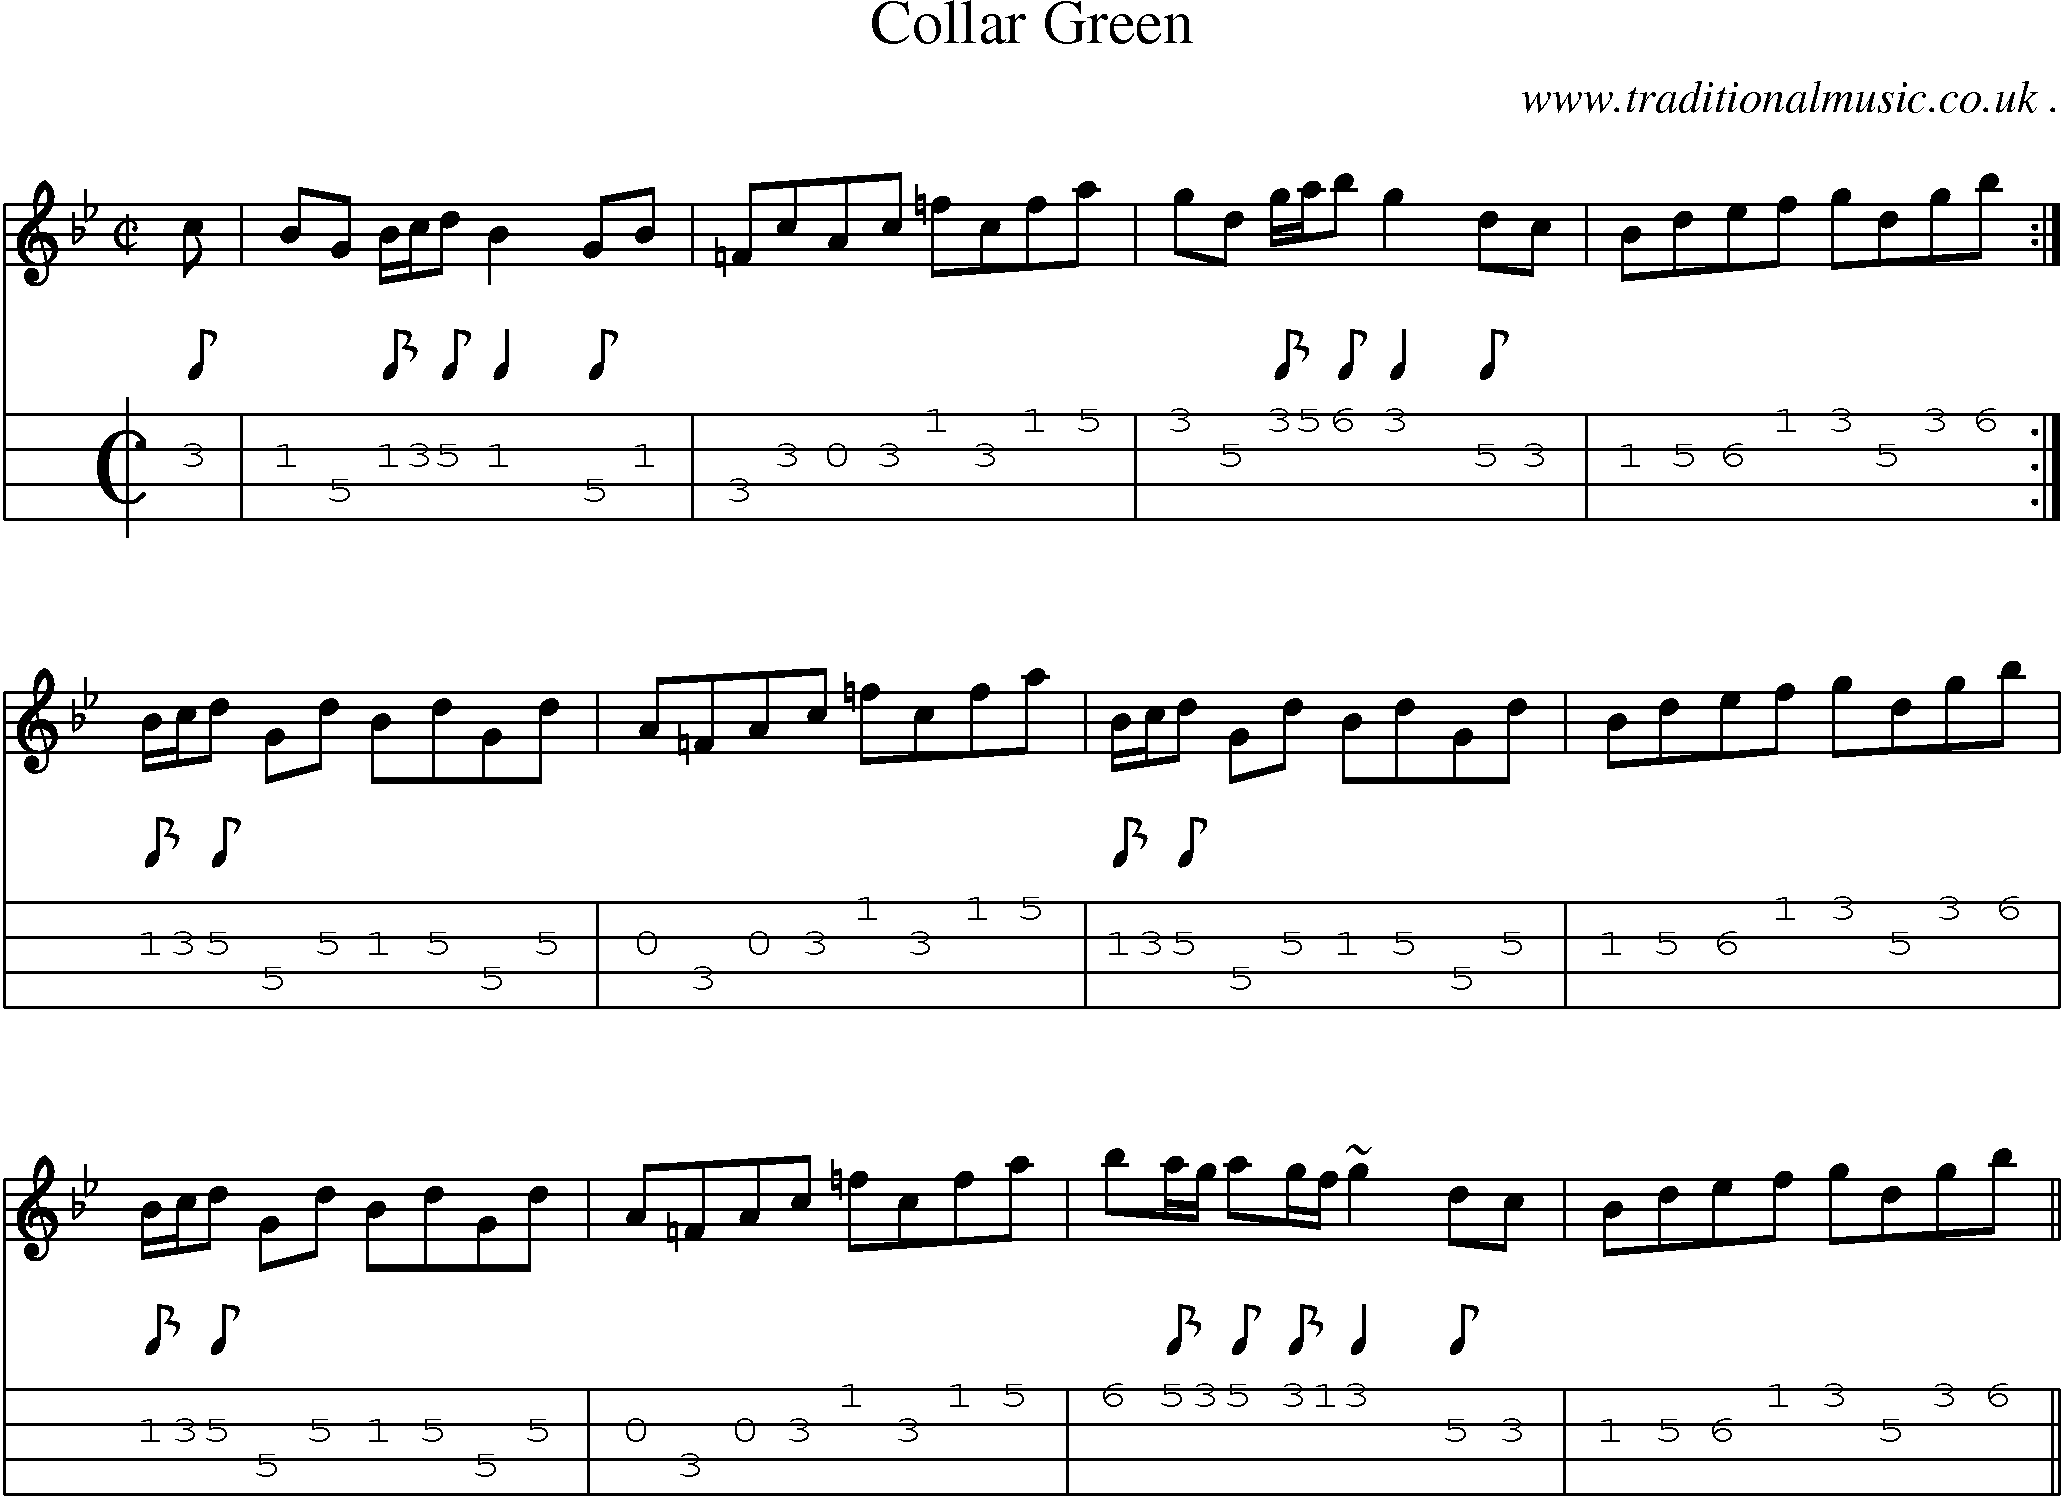 Sheet-music  score, Chords and Mandolin Tabs for Collar Green